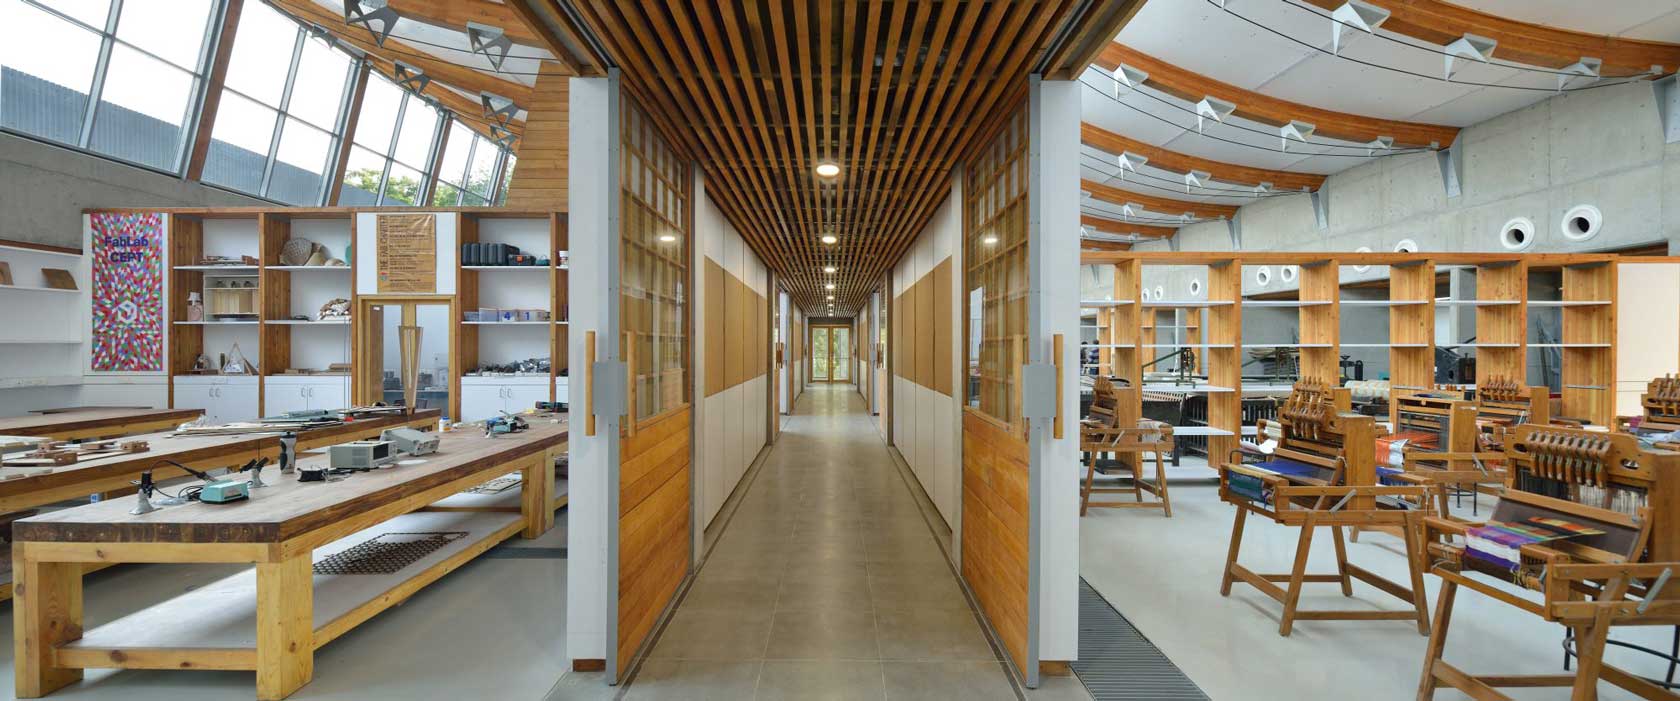 cept-ahmedabad-interior-canada-wood-exported